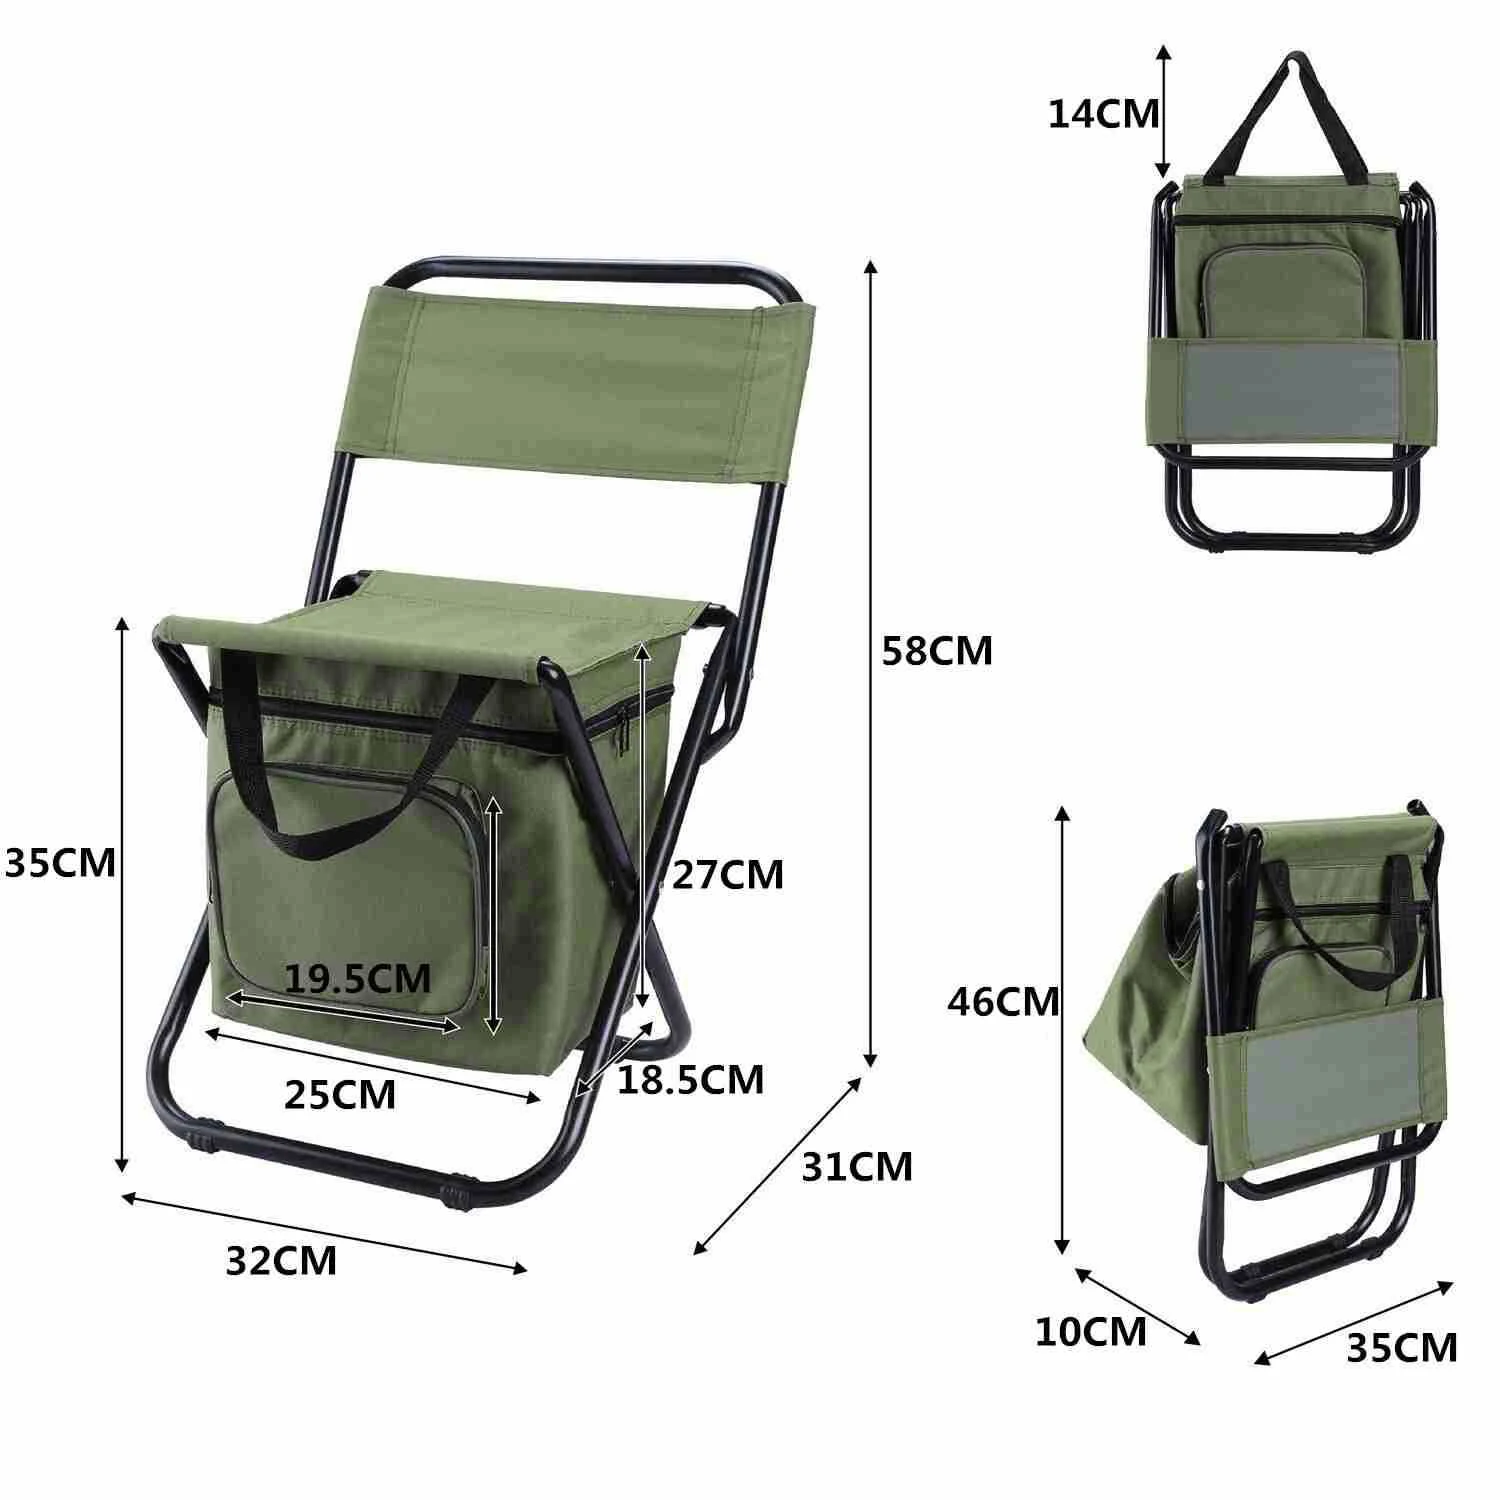 Tourbon Lightweight Outdoor Folding Chair Seat with Portable Insulated Bag Cooler Picnic Hiking Camping Fishing Stool enlarge